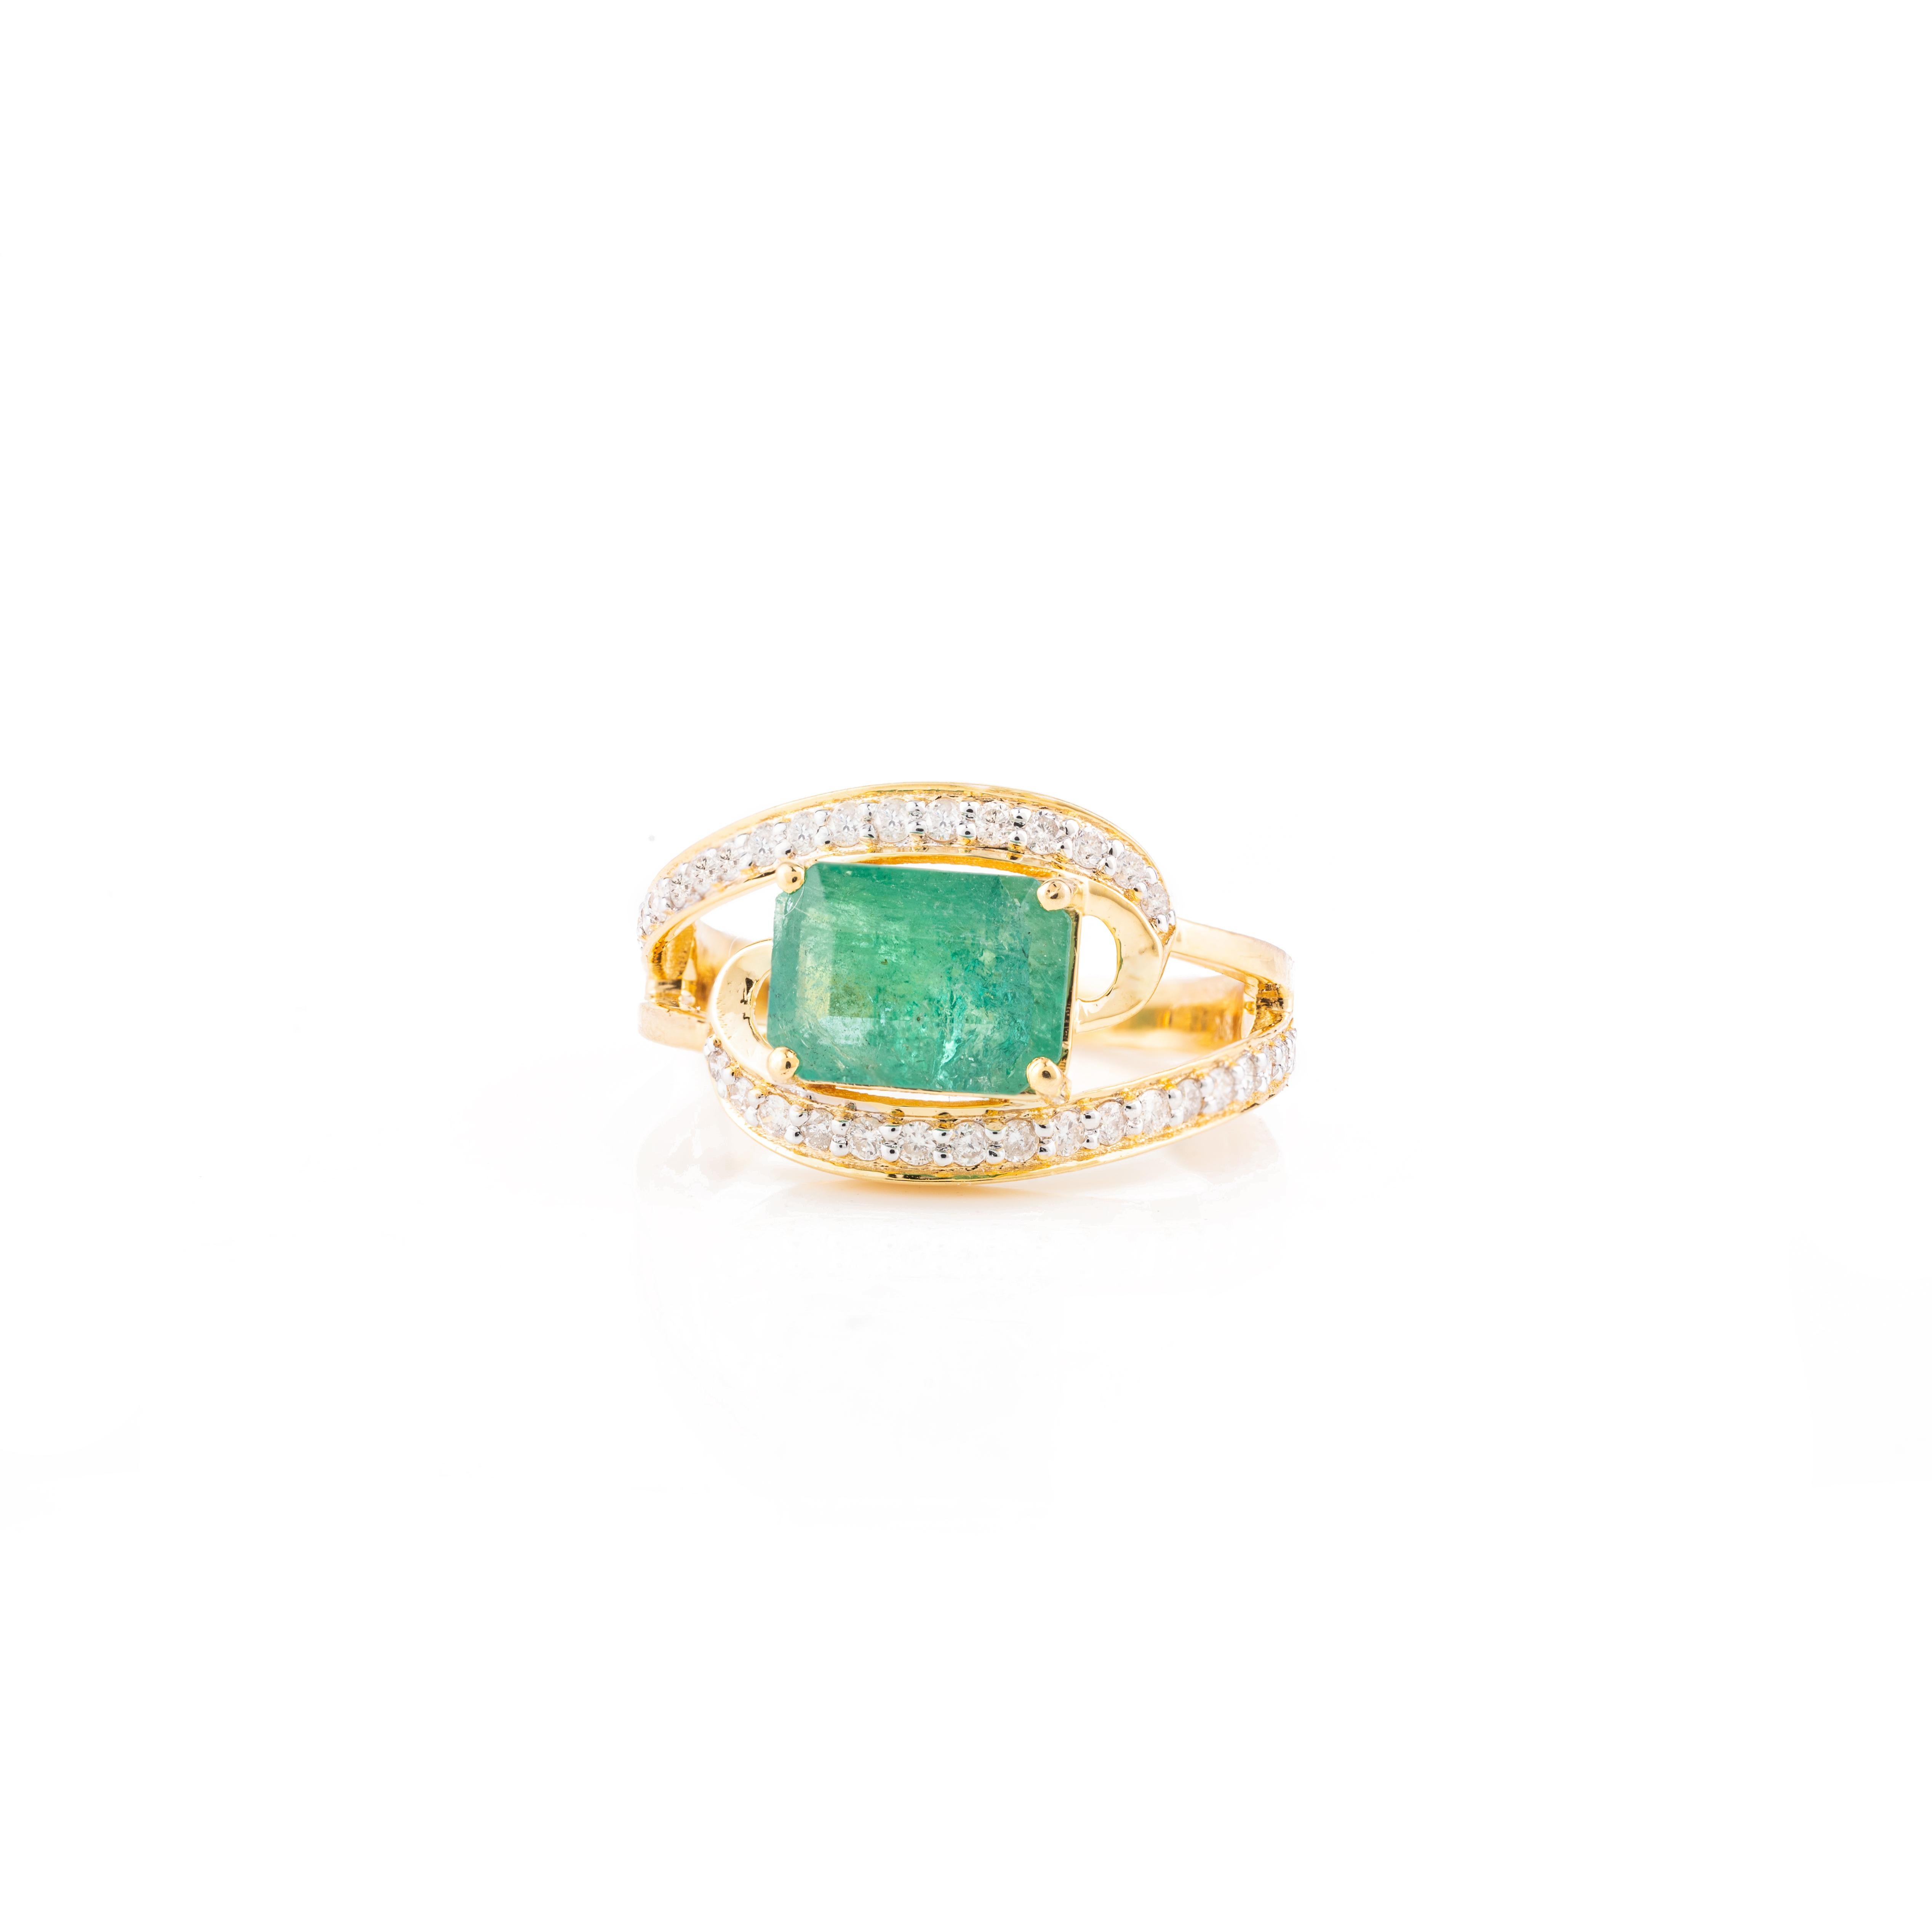 For Sale:  Magnificent Emerald and Diamond Wedding Ring in 18k Solid Yellow Gold 3